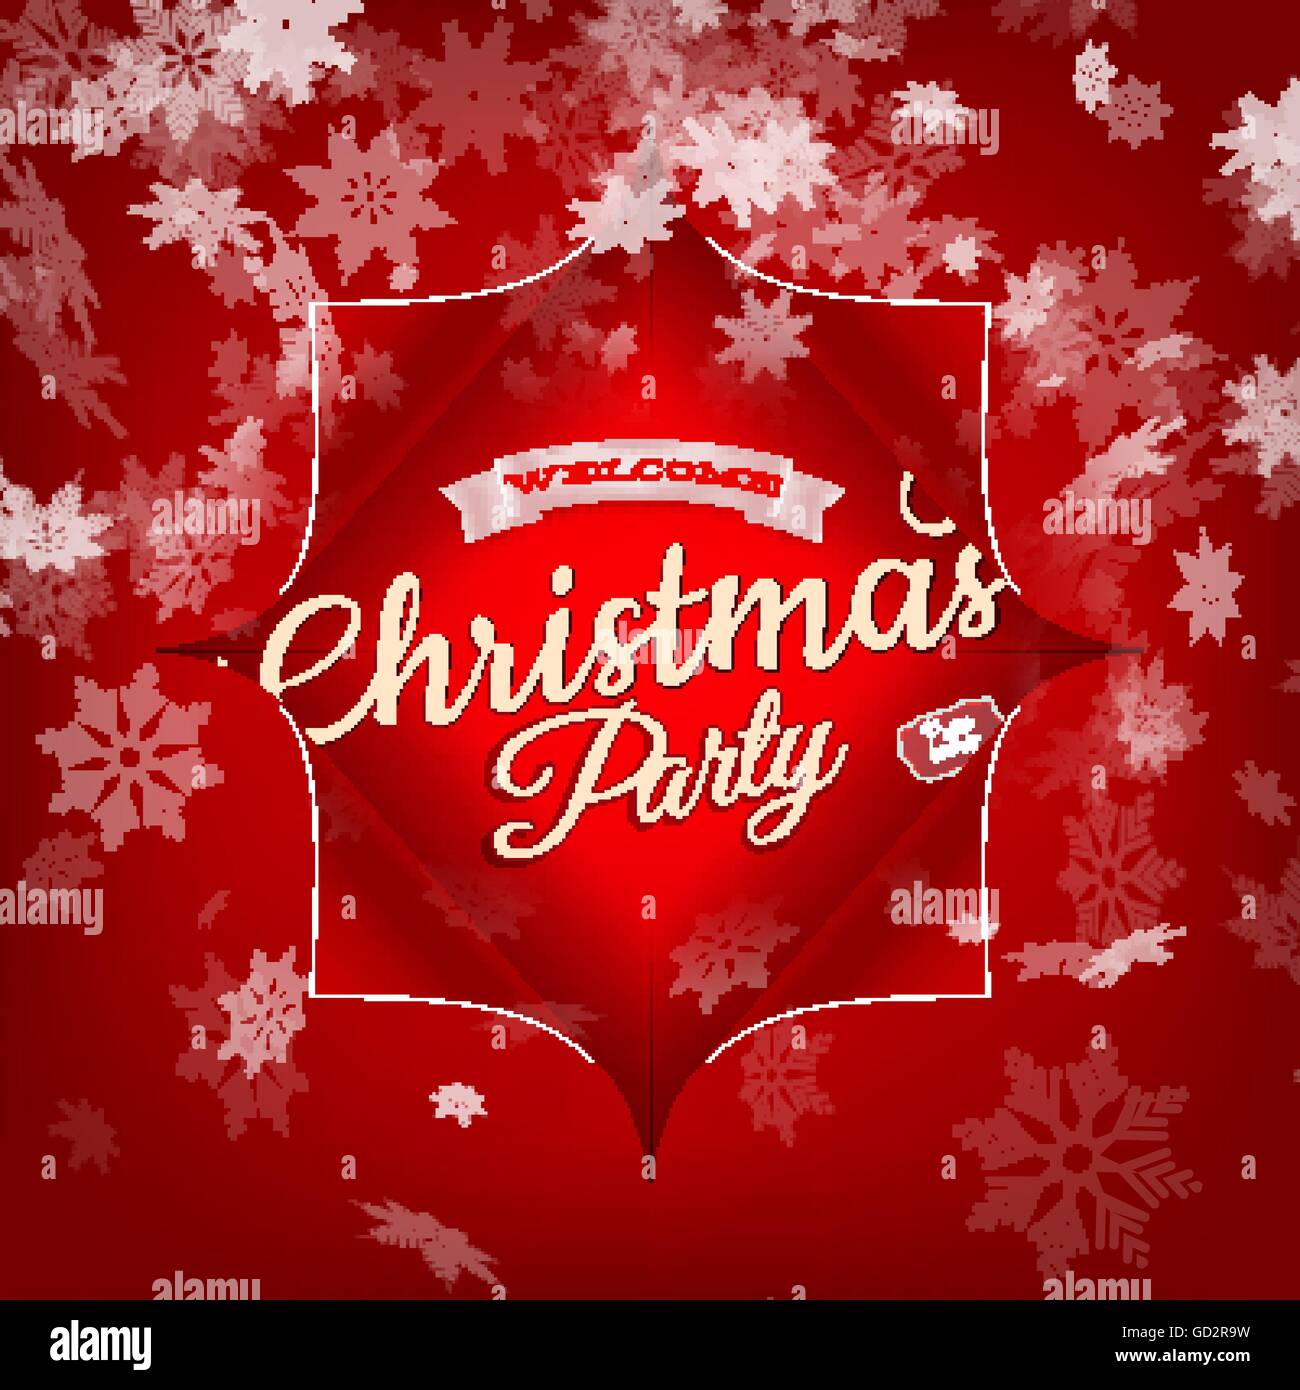 Merry Christmas Party invitation template. EPS 10 Stock Vector